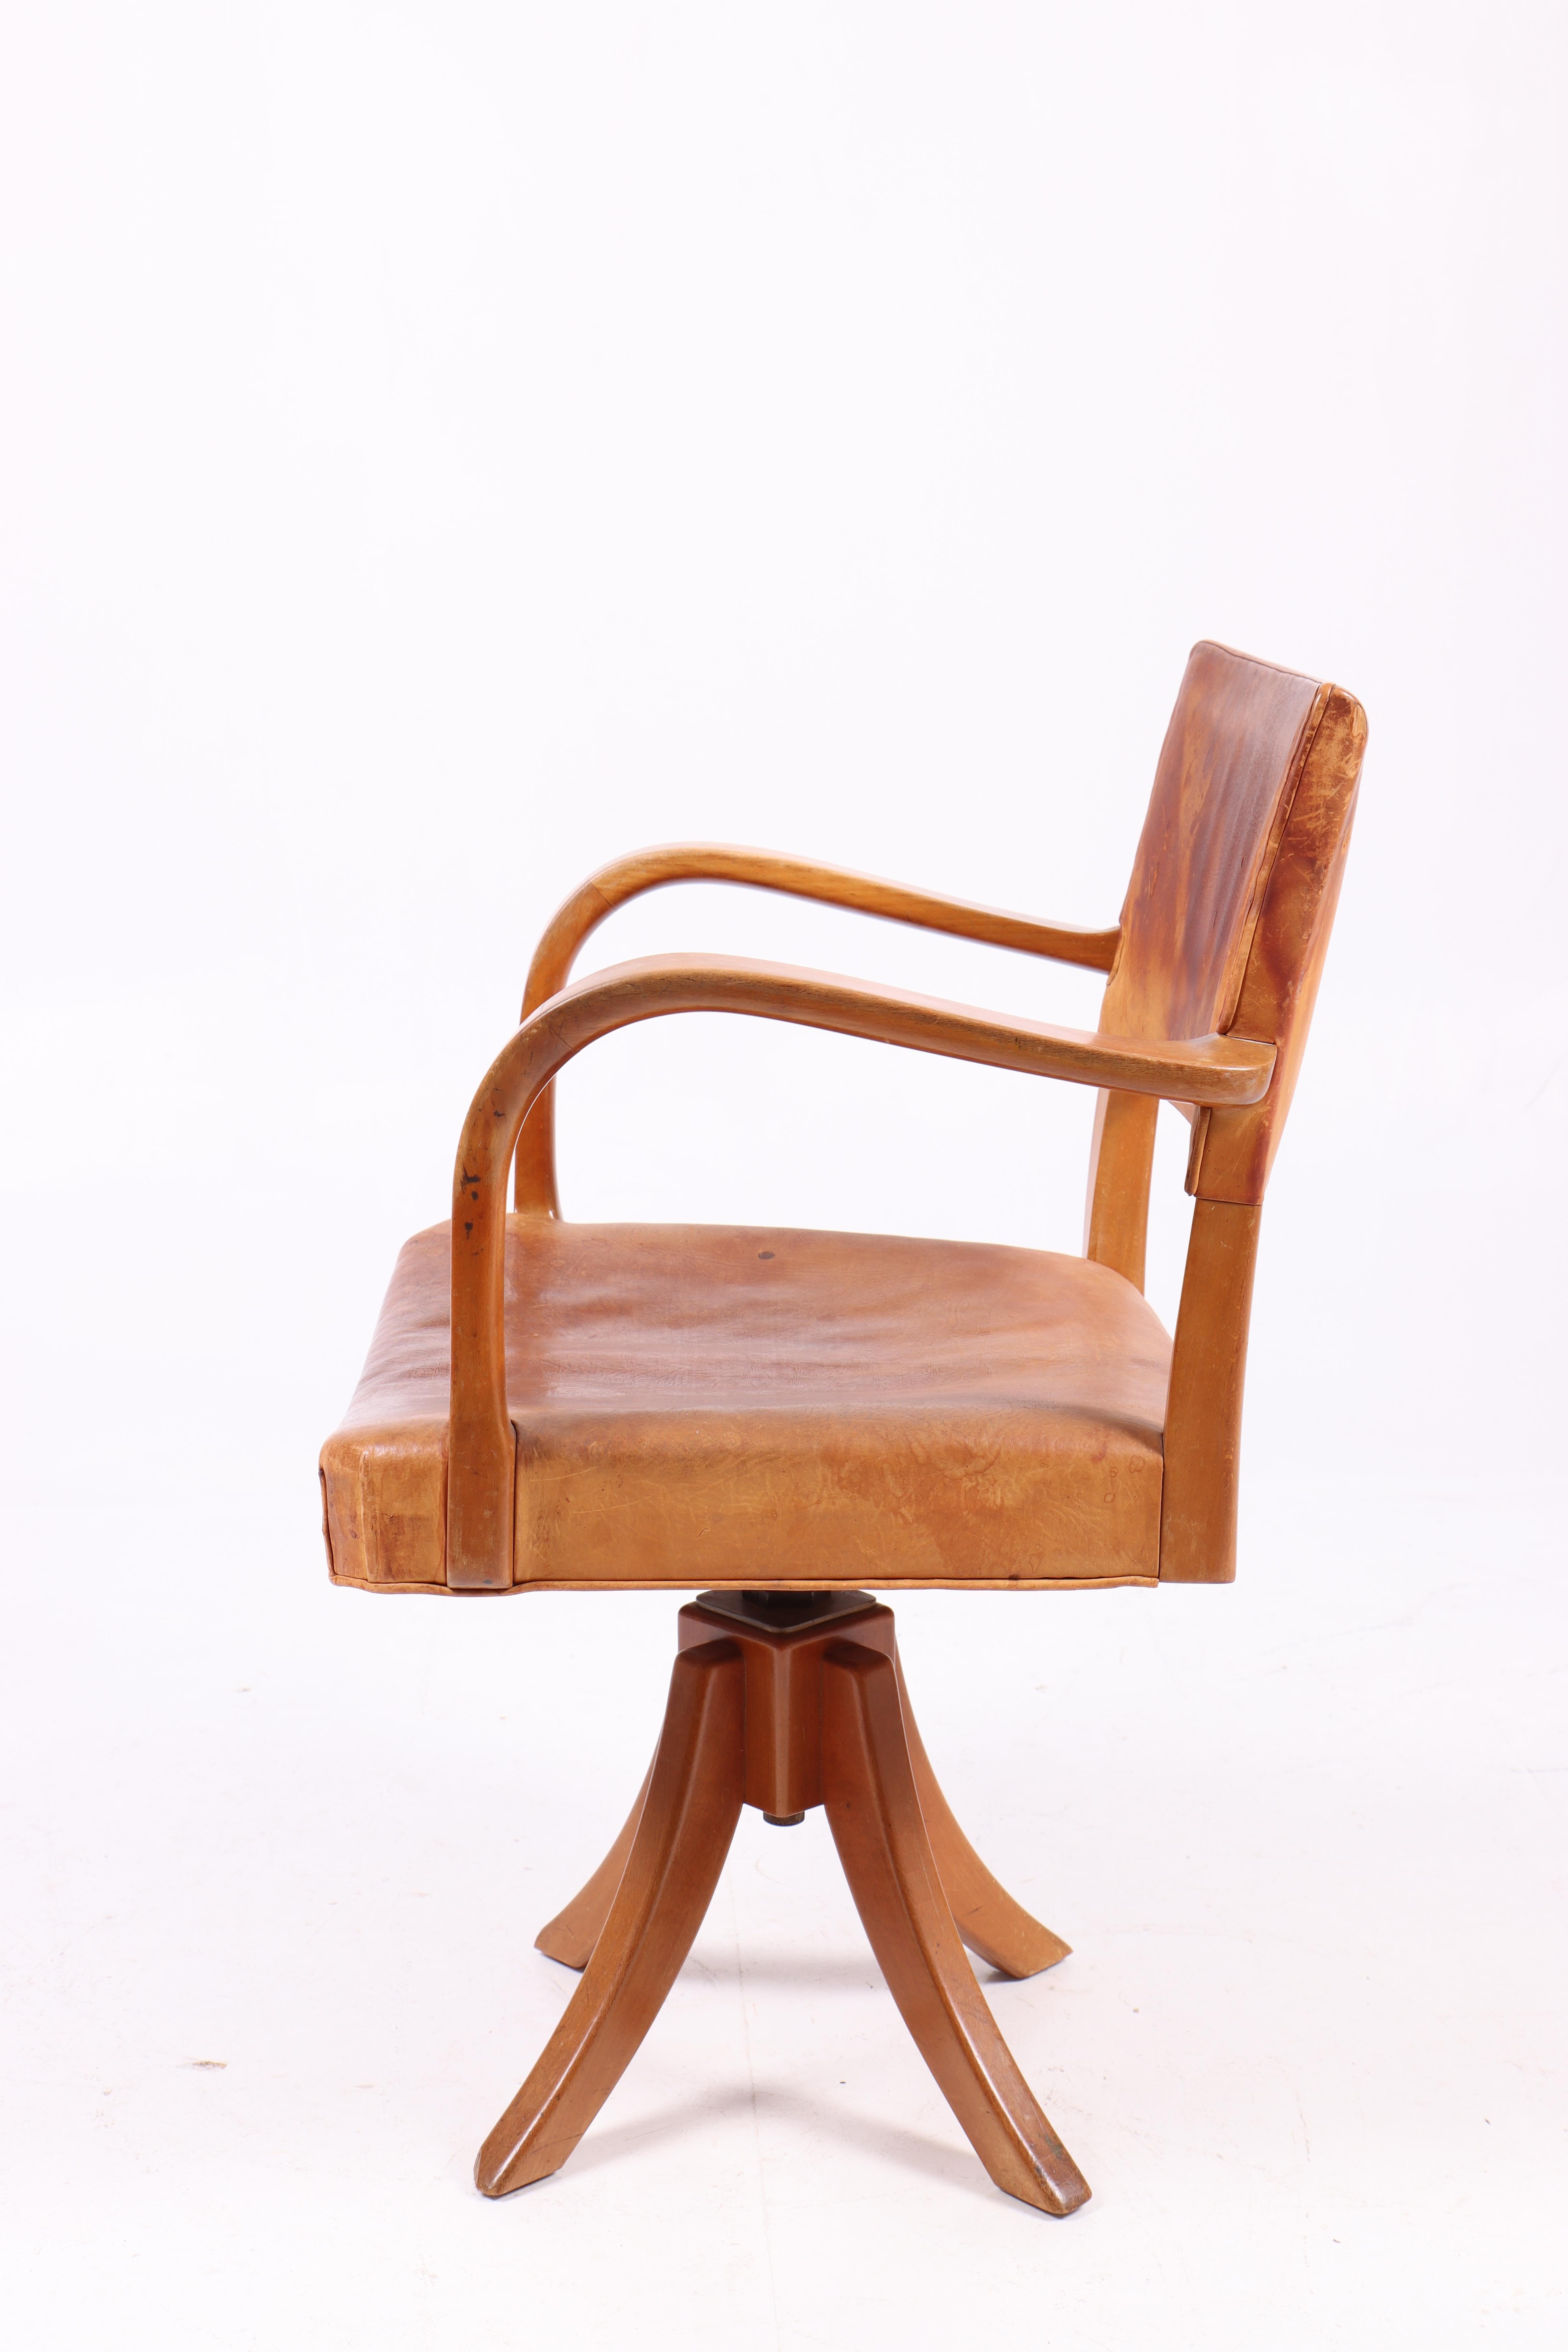 Scandinavian Modern Desk Chair in Patinated Leather by Danish Cabinetmaker 1940s For Sale